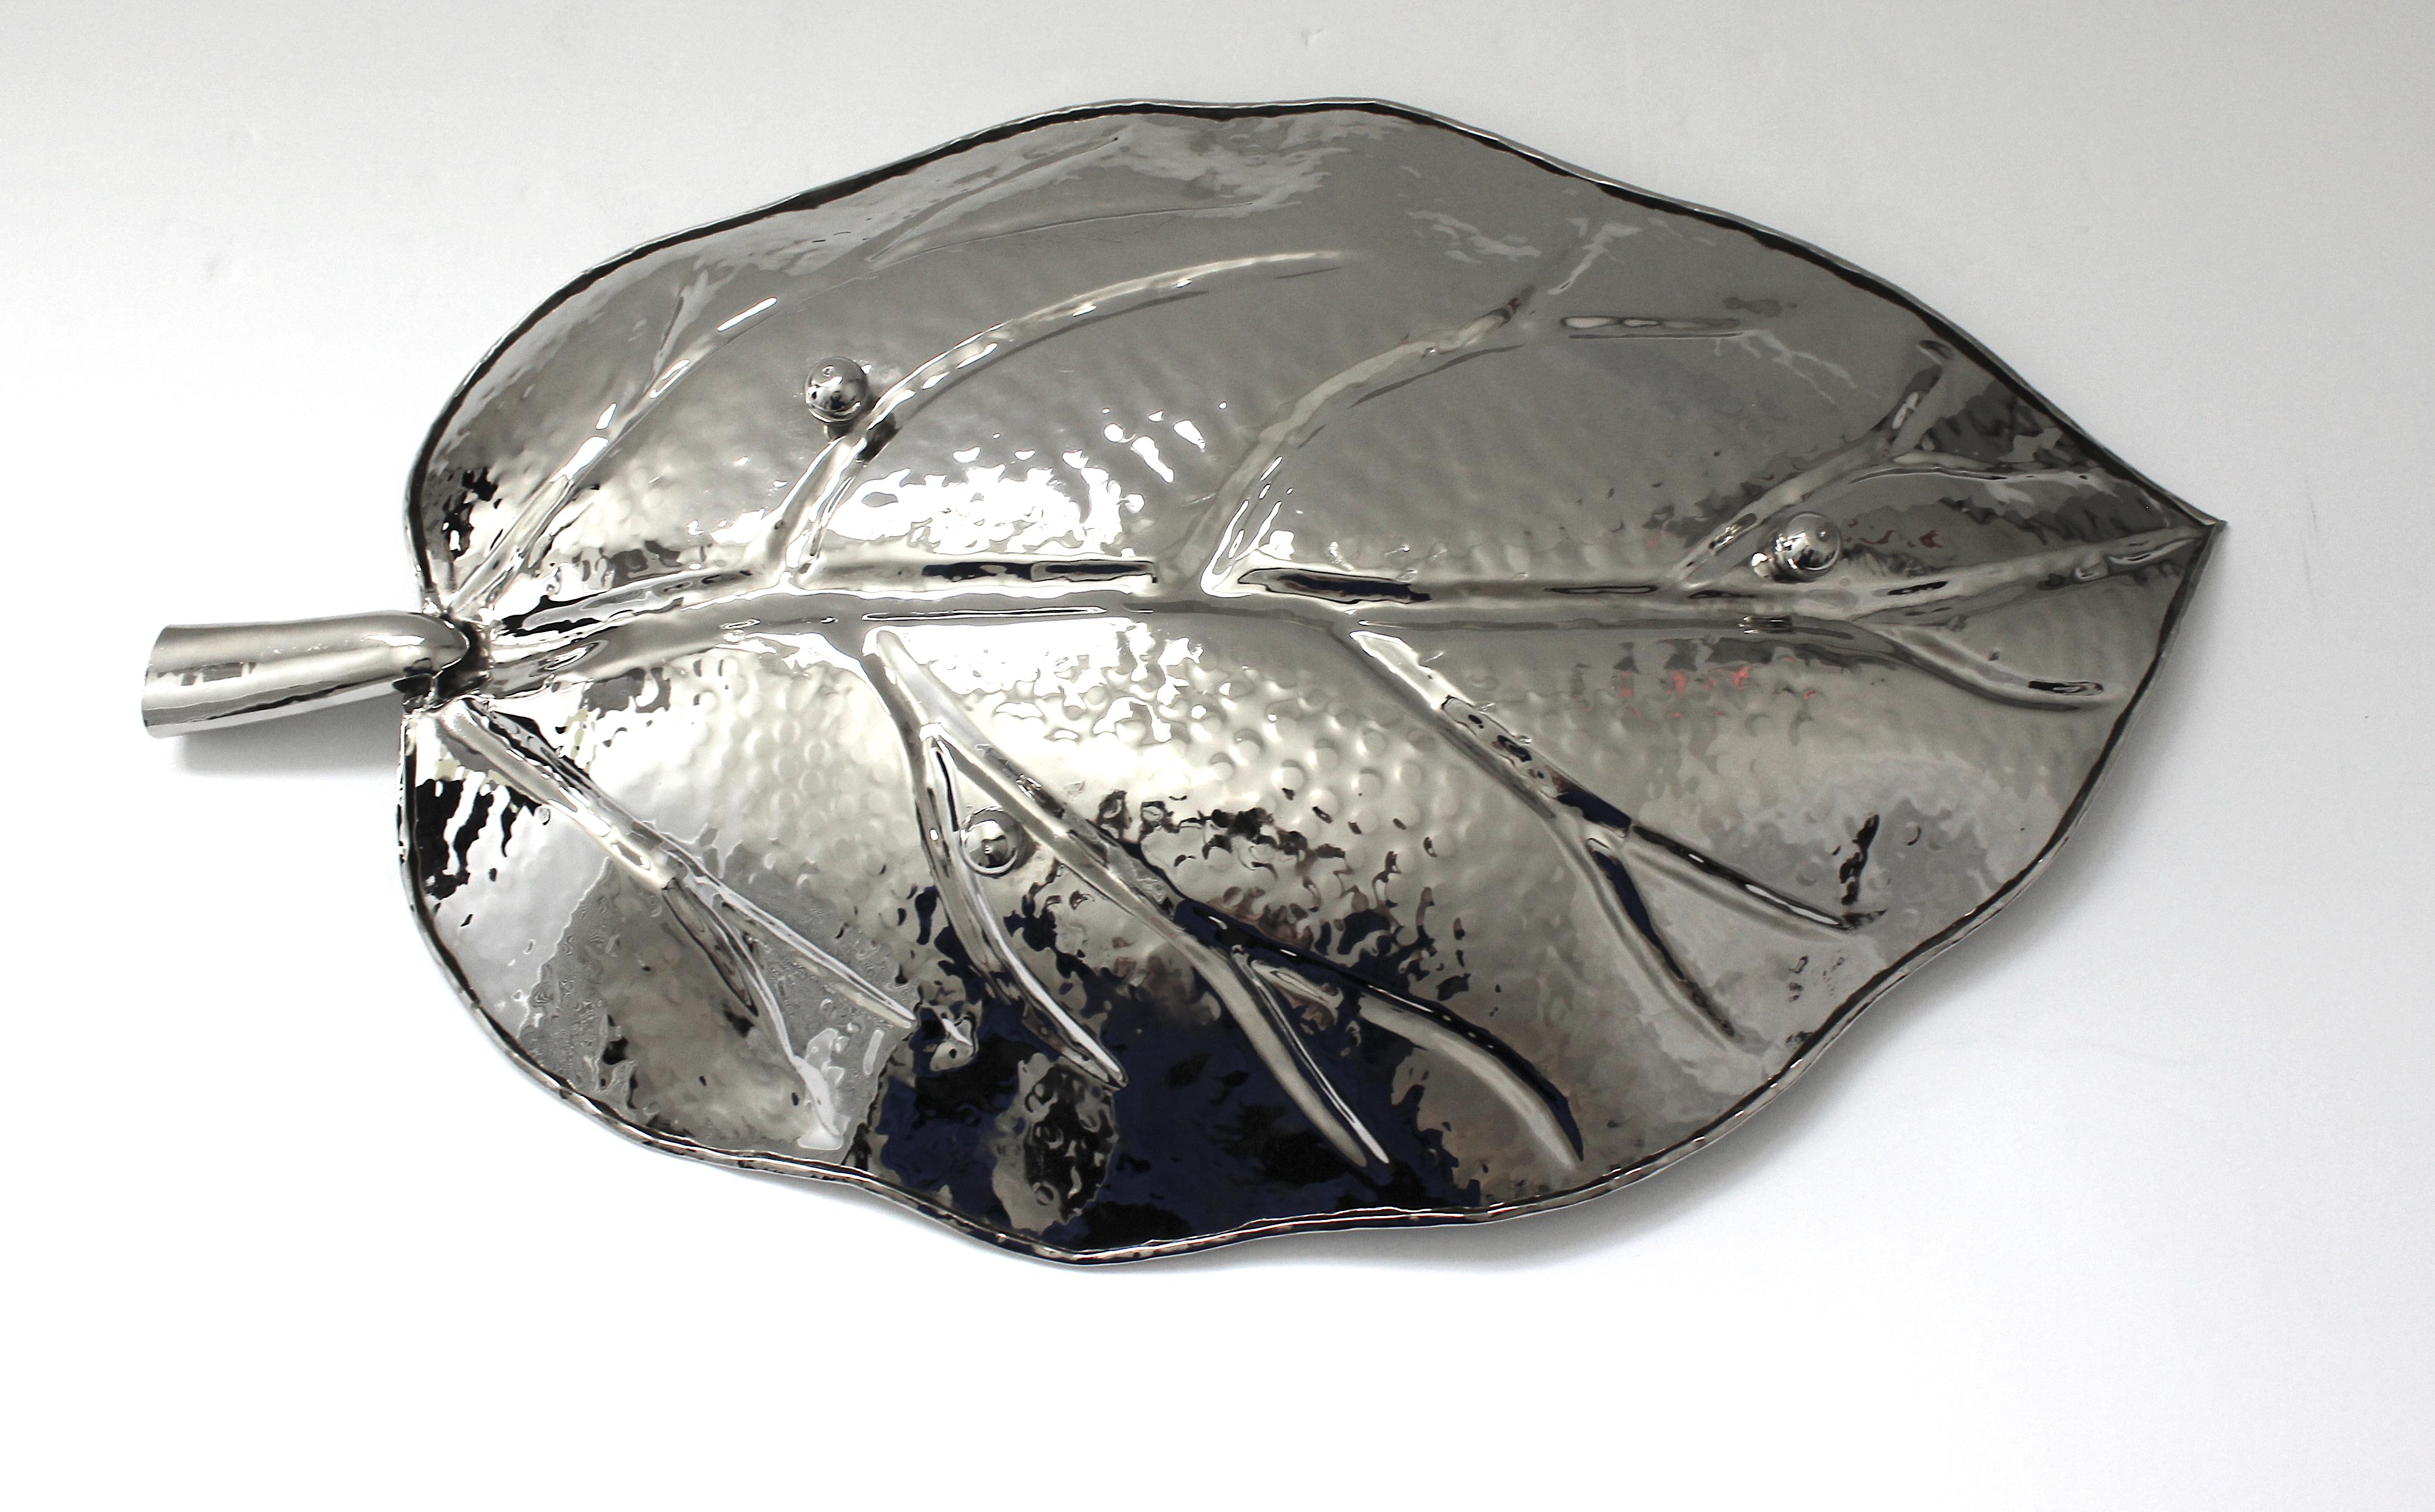 Nickel Plated Leaf Form Serving Tray by Iconic Snob Galeries In Good Condition For Sale In West Palm Beach, FL